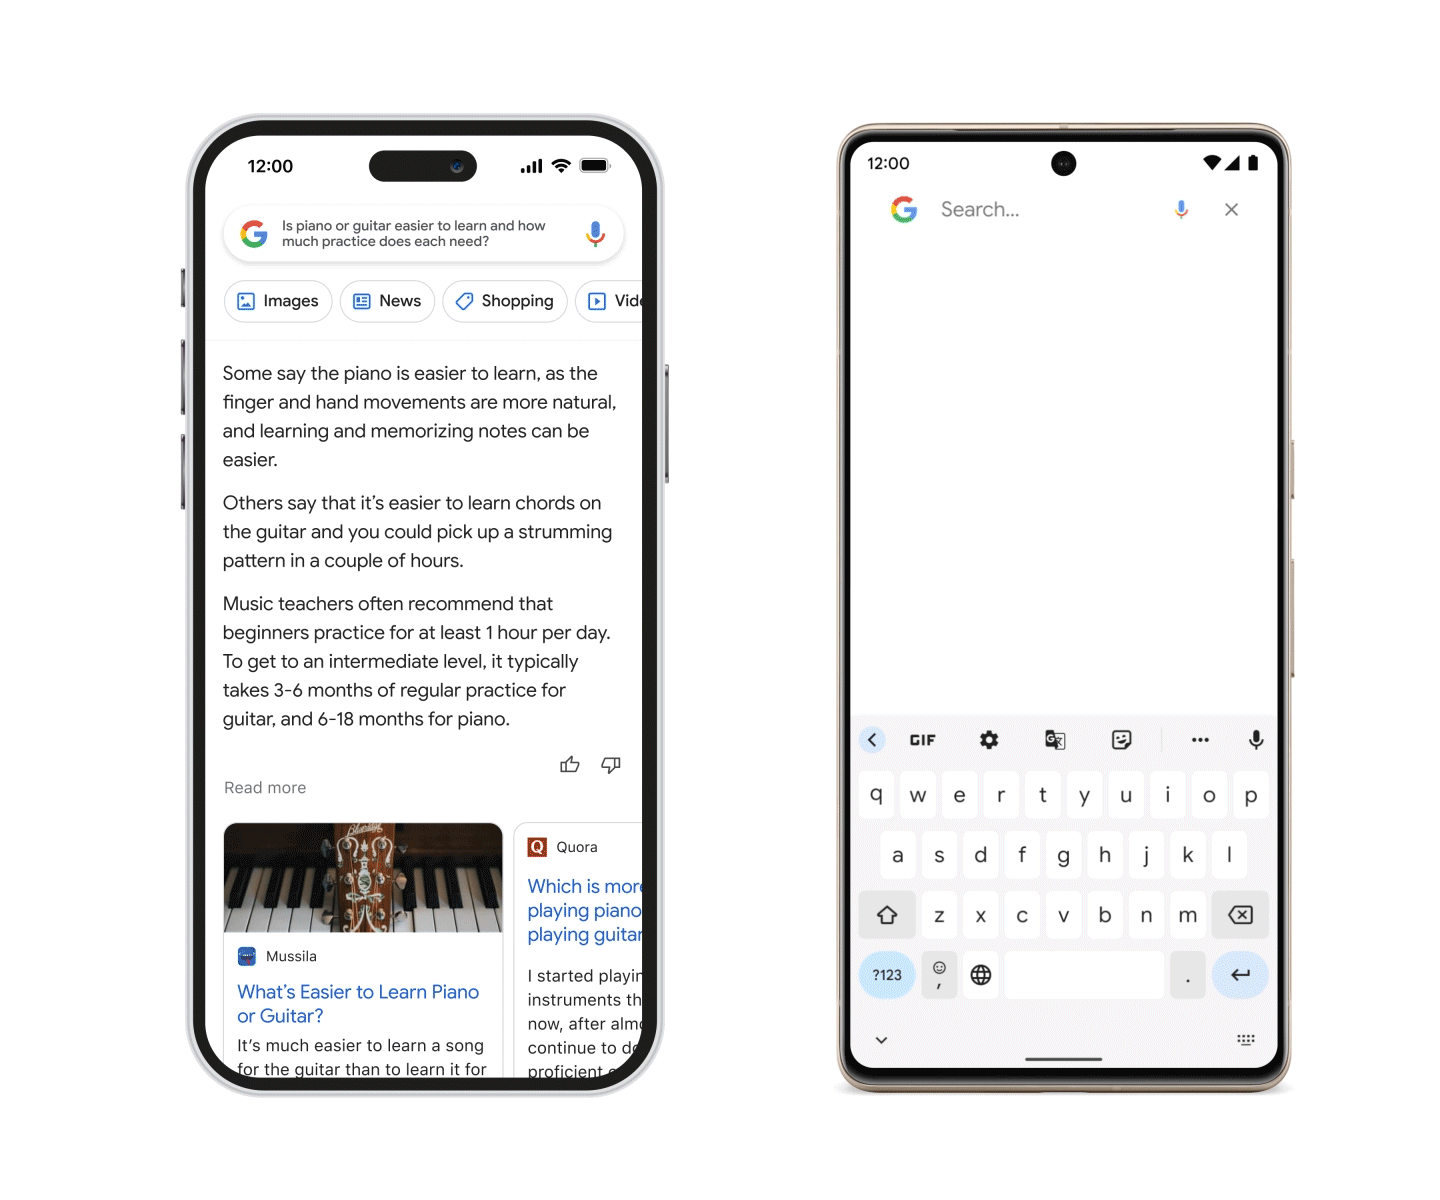 Google Bard and new AI features